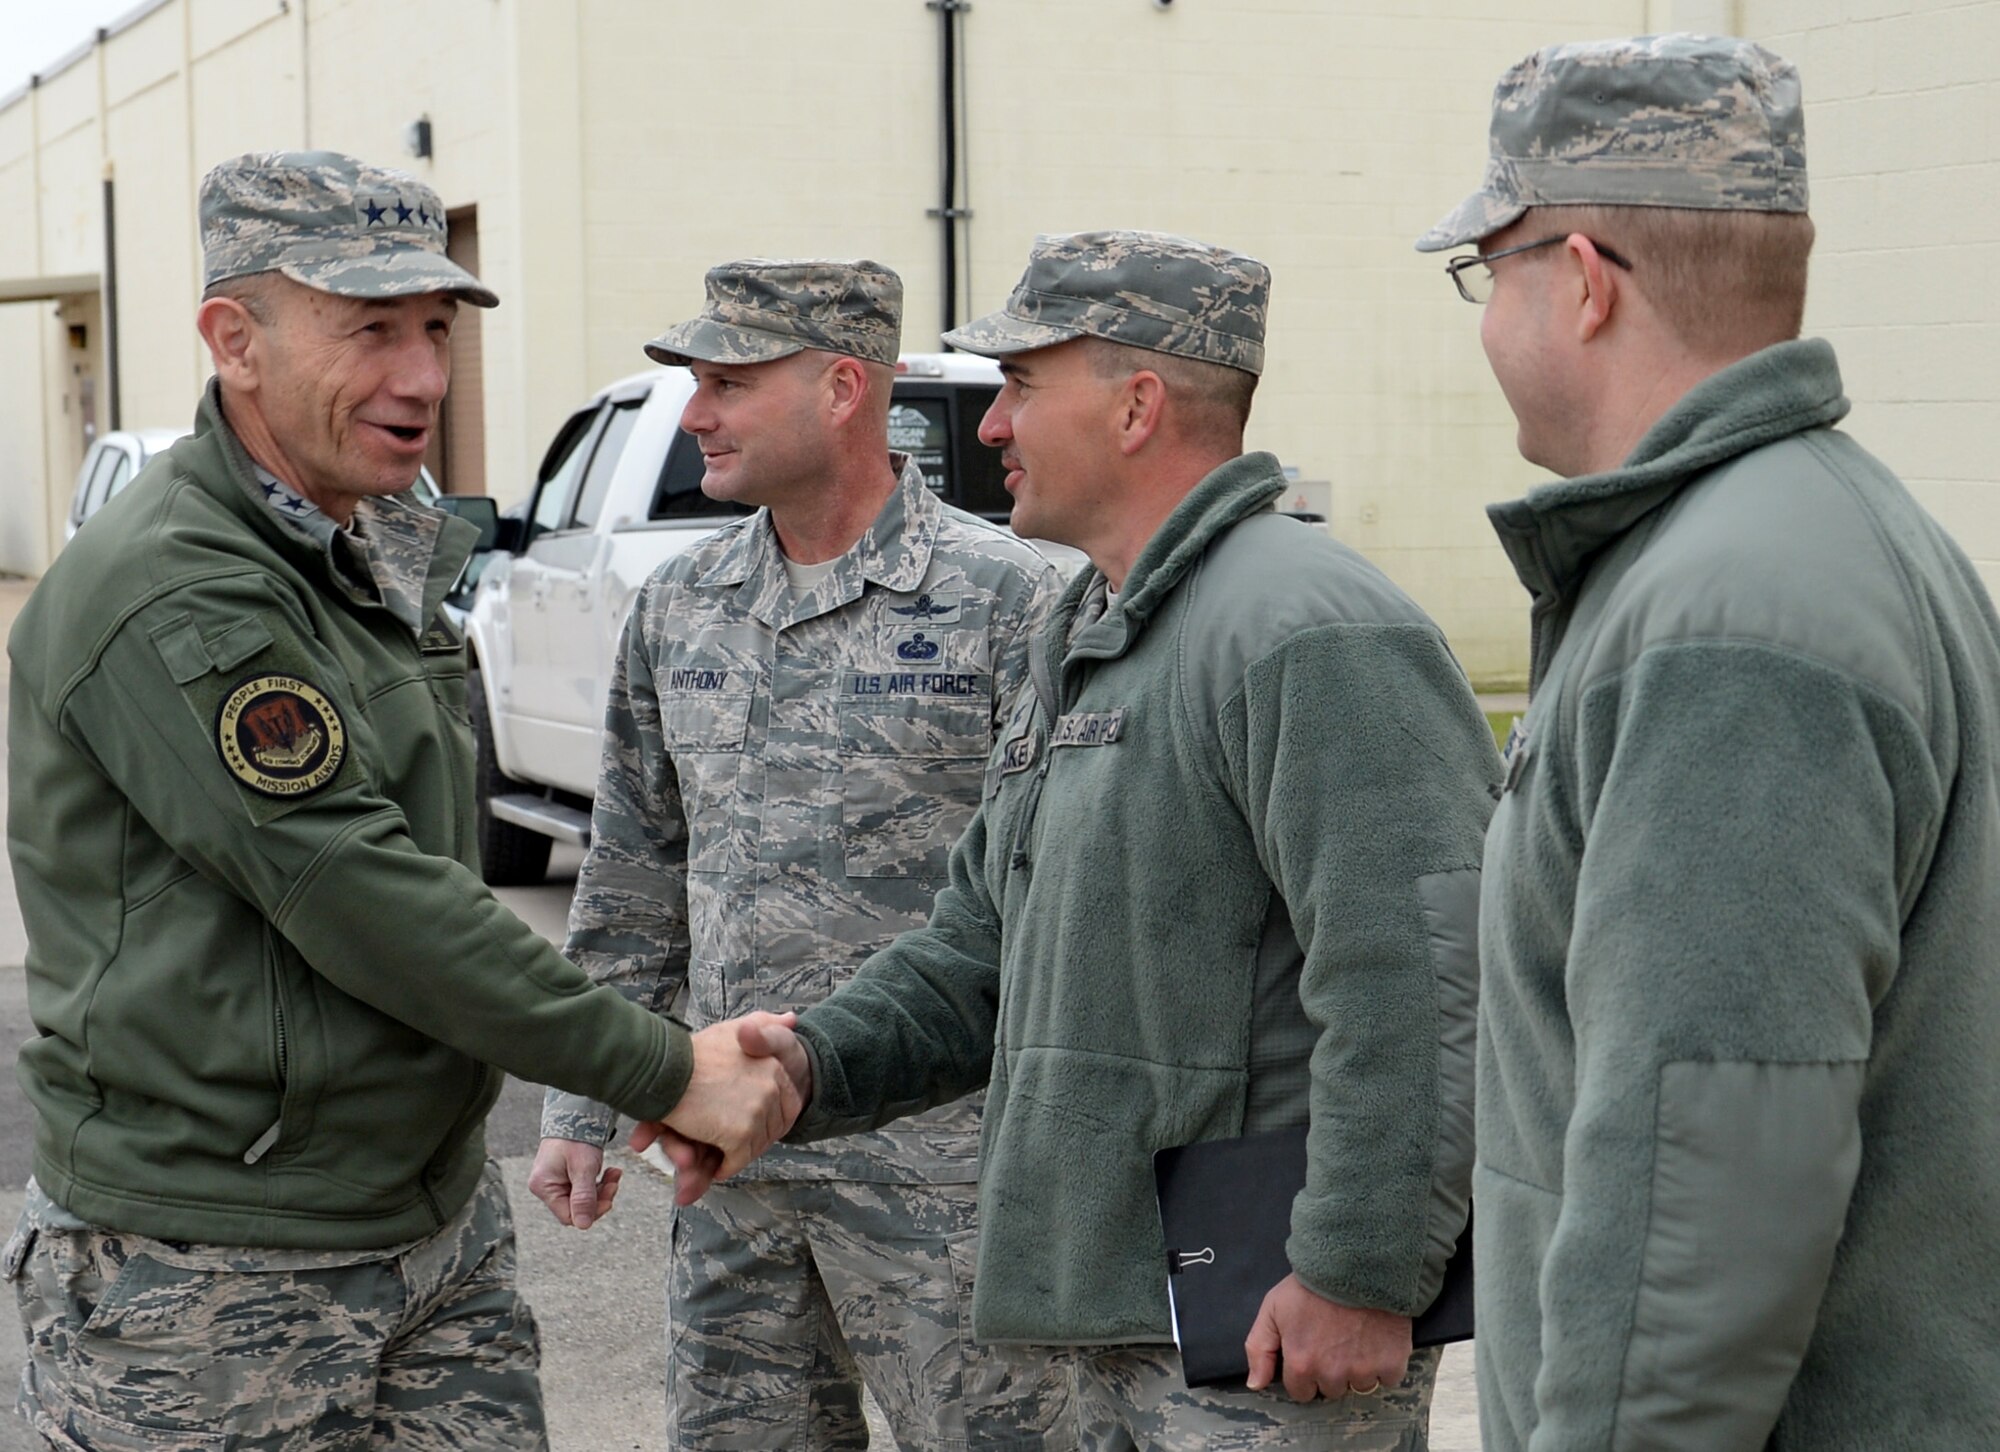 U.S. Air Force Gen. Mike Holmes, commander of Air Combat Command, is greeted by 67th Cyberspace Wing leaders during his visit to Joint Base San Antonio-Lackland, Texas, March 4, 2019. Holmes toured several Air Forces Cyber units to meet Airmen and gain knowledge about the cyber mission. (U.S. Air Force Photo by Tech. Sgt. R.J. Biermann)